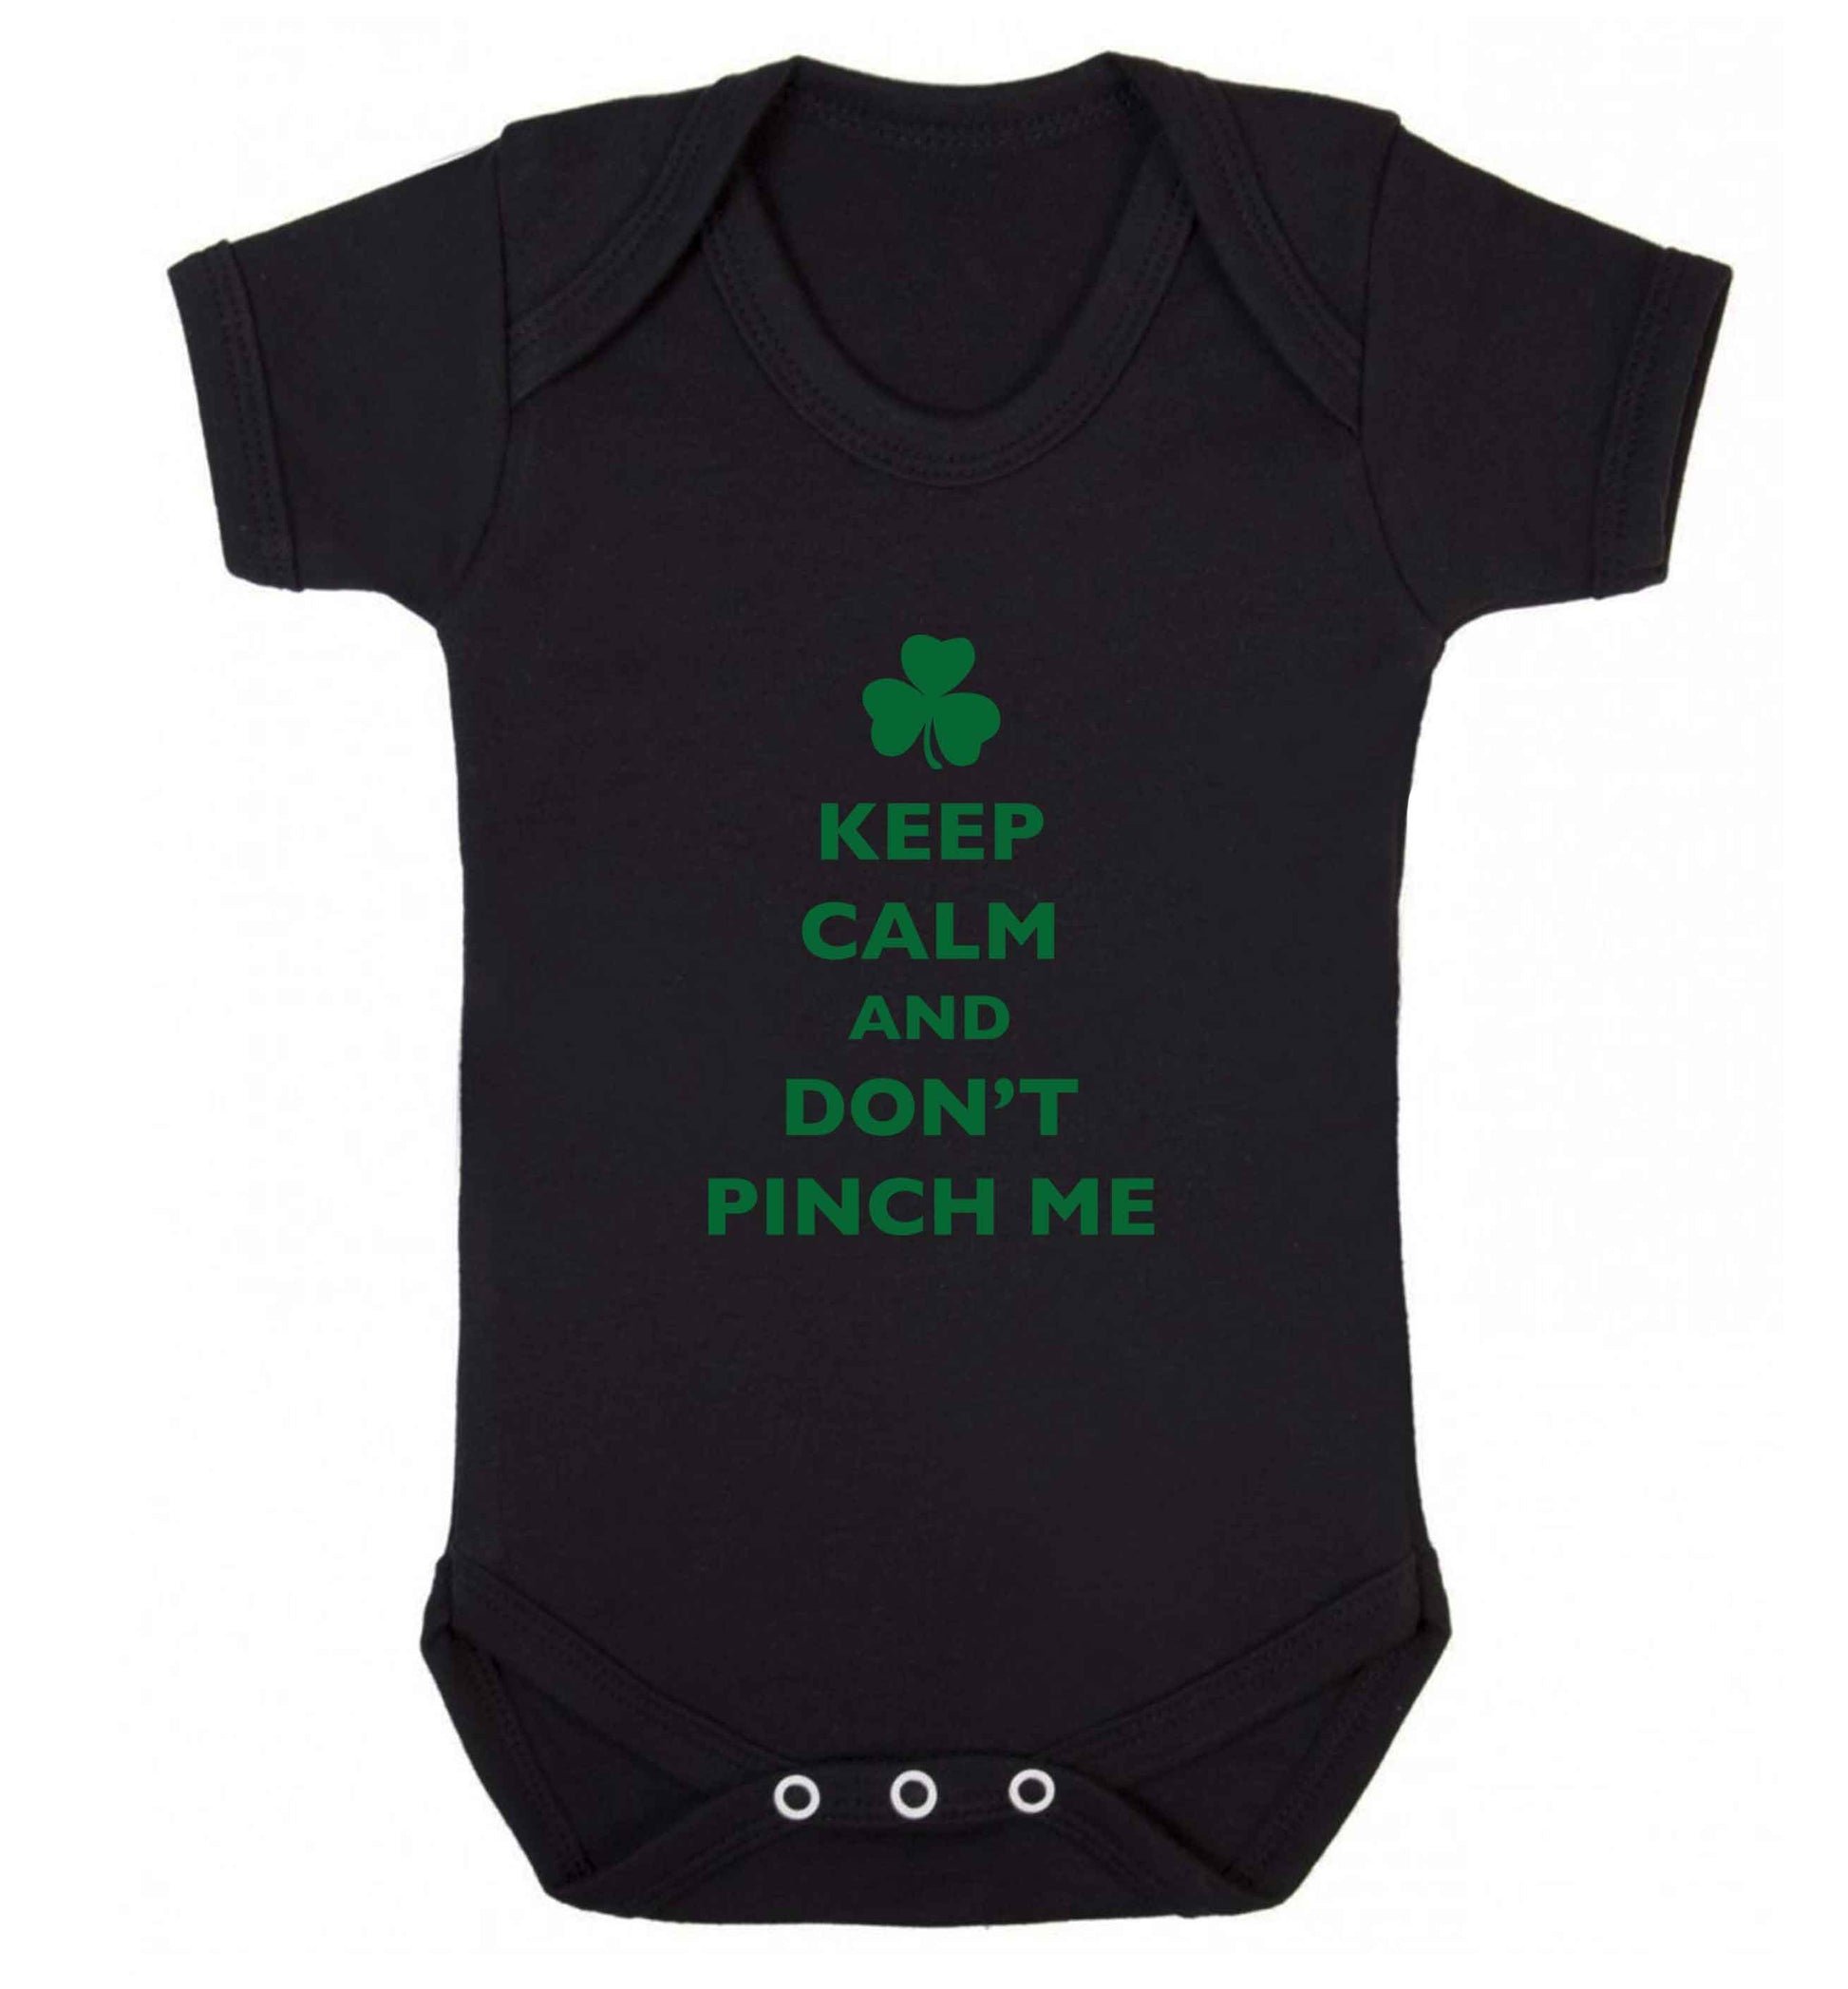 Keep calm and don't pinch me baby vest black 18-24 months